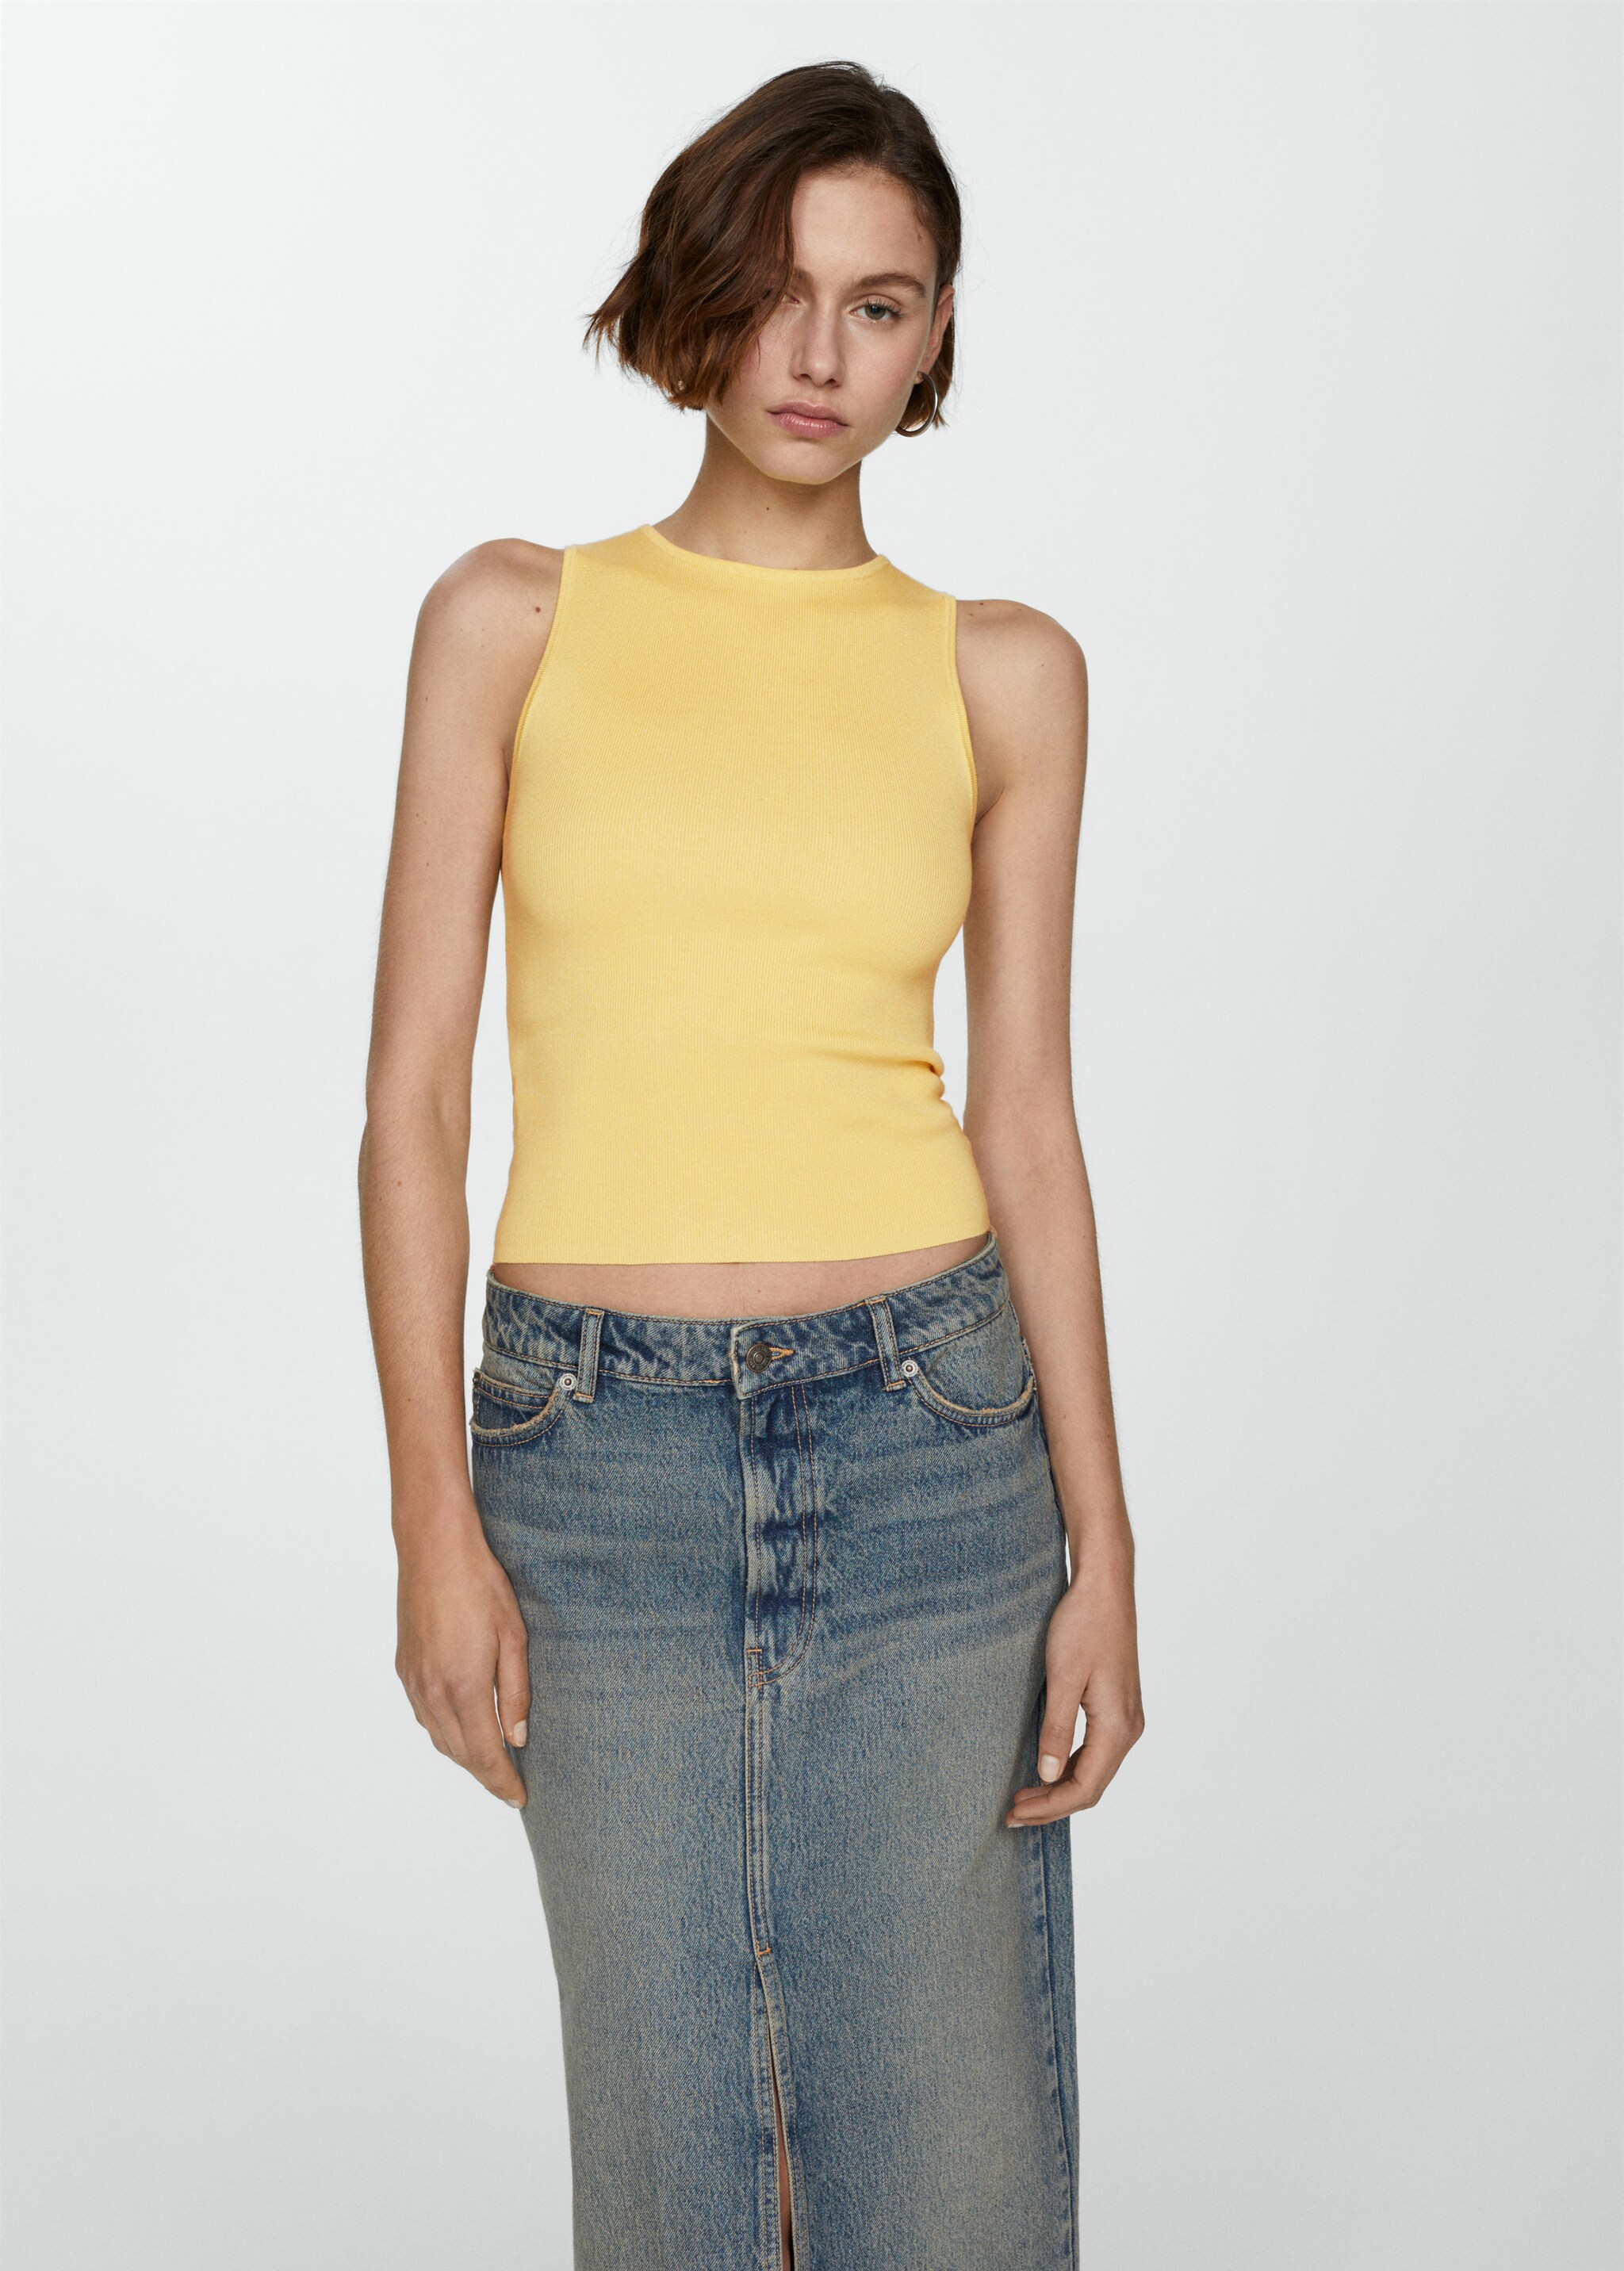 Knitted top with wide straps - Medium plane